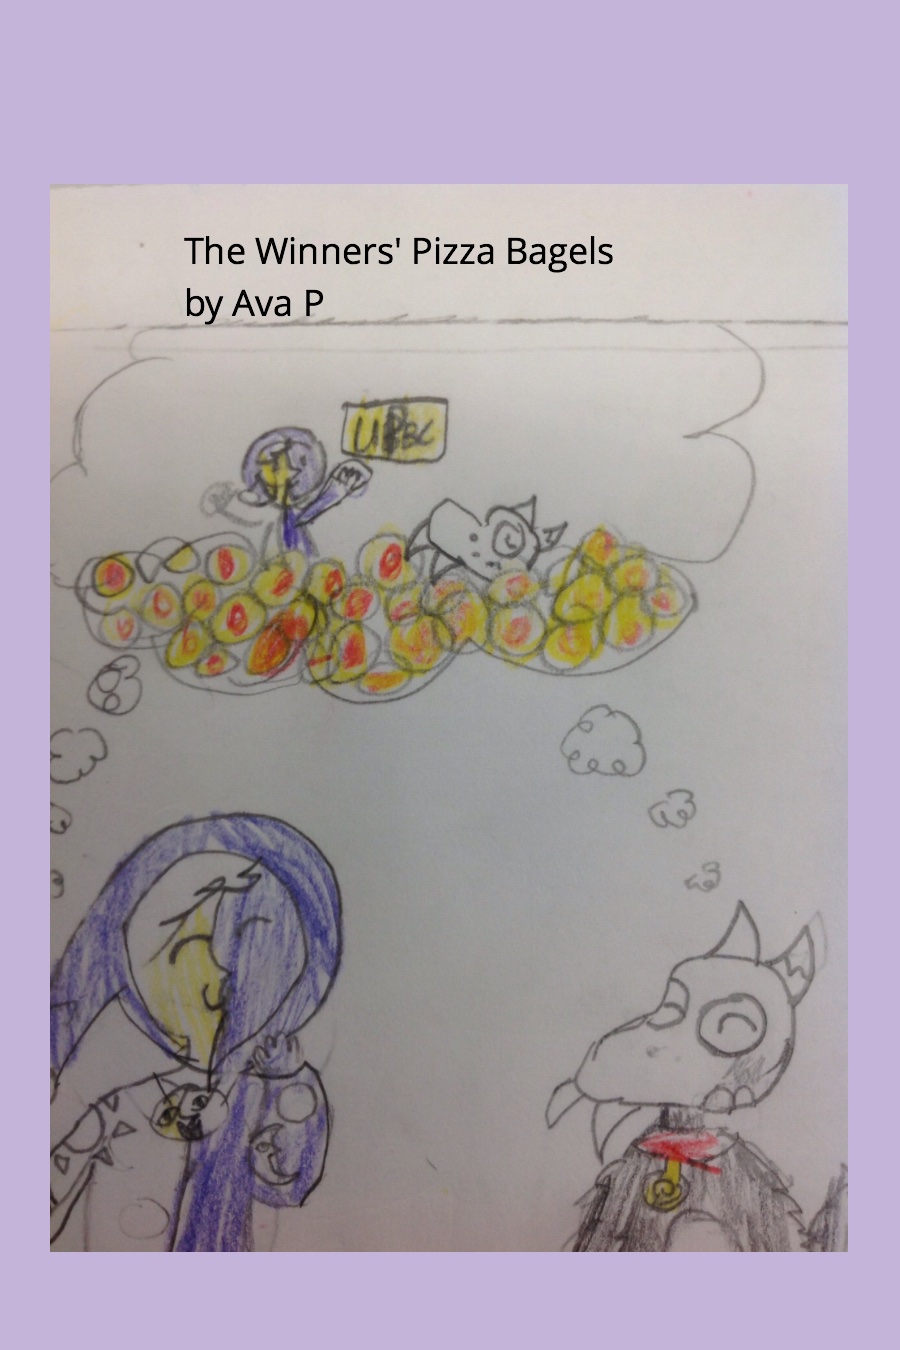 The Winner’s Pizza Beagles by Ava P